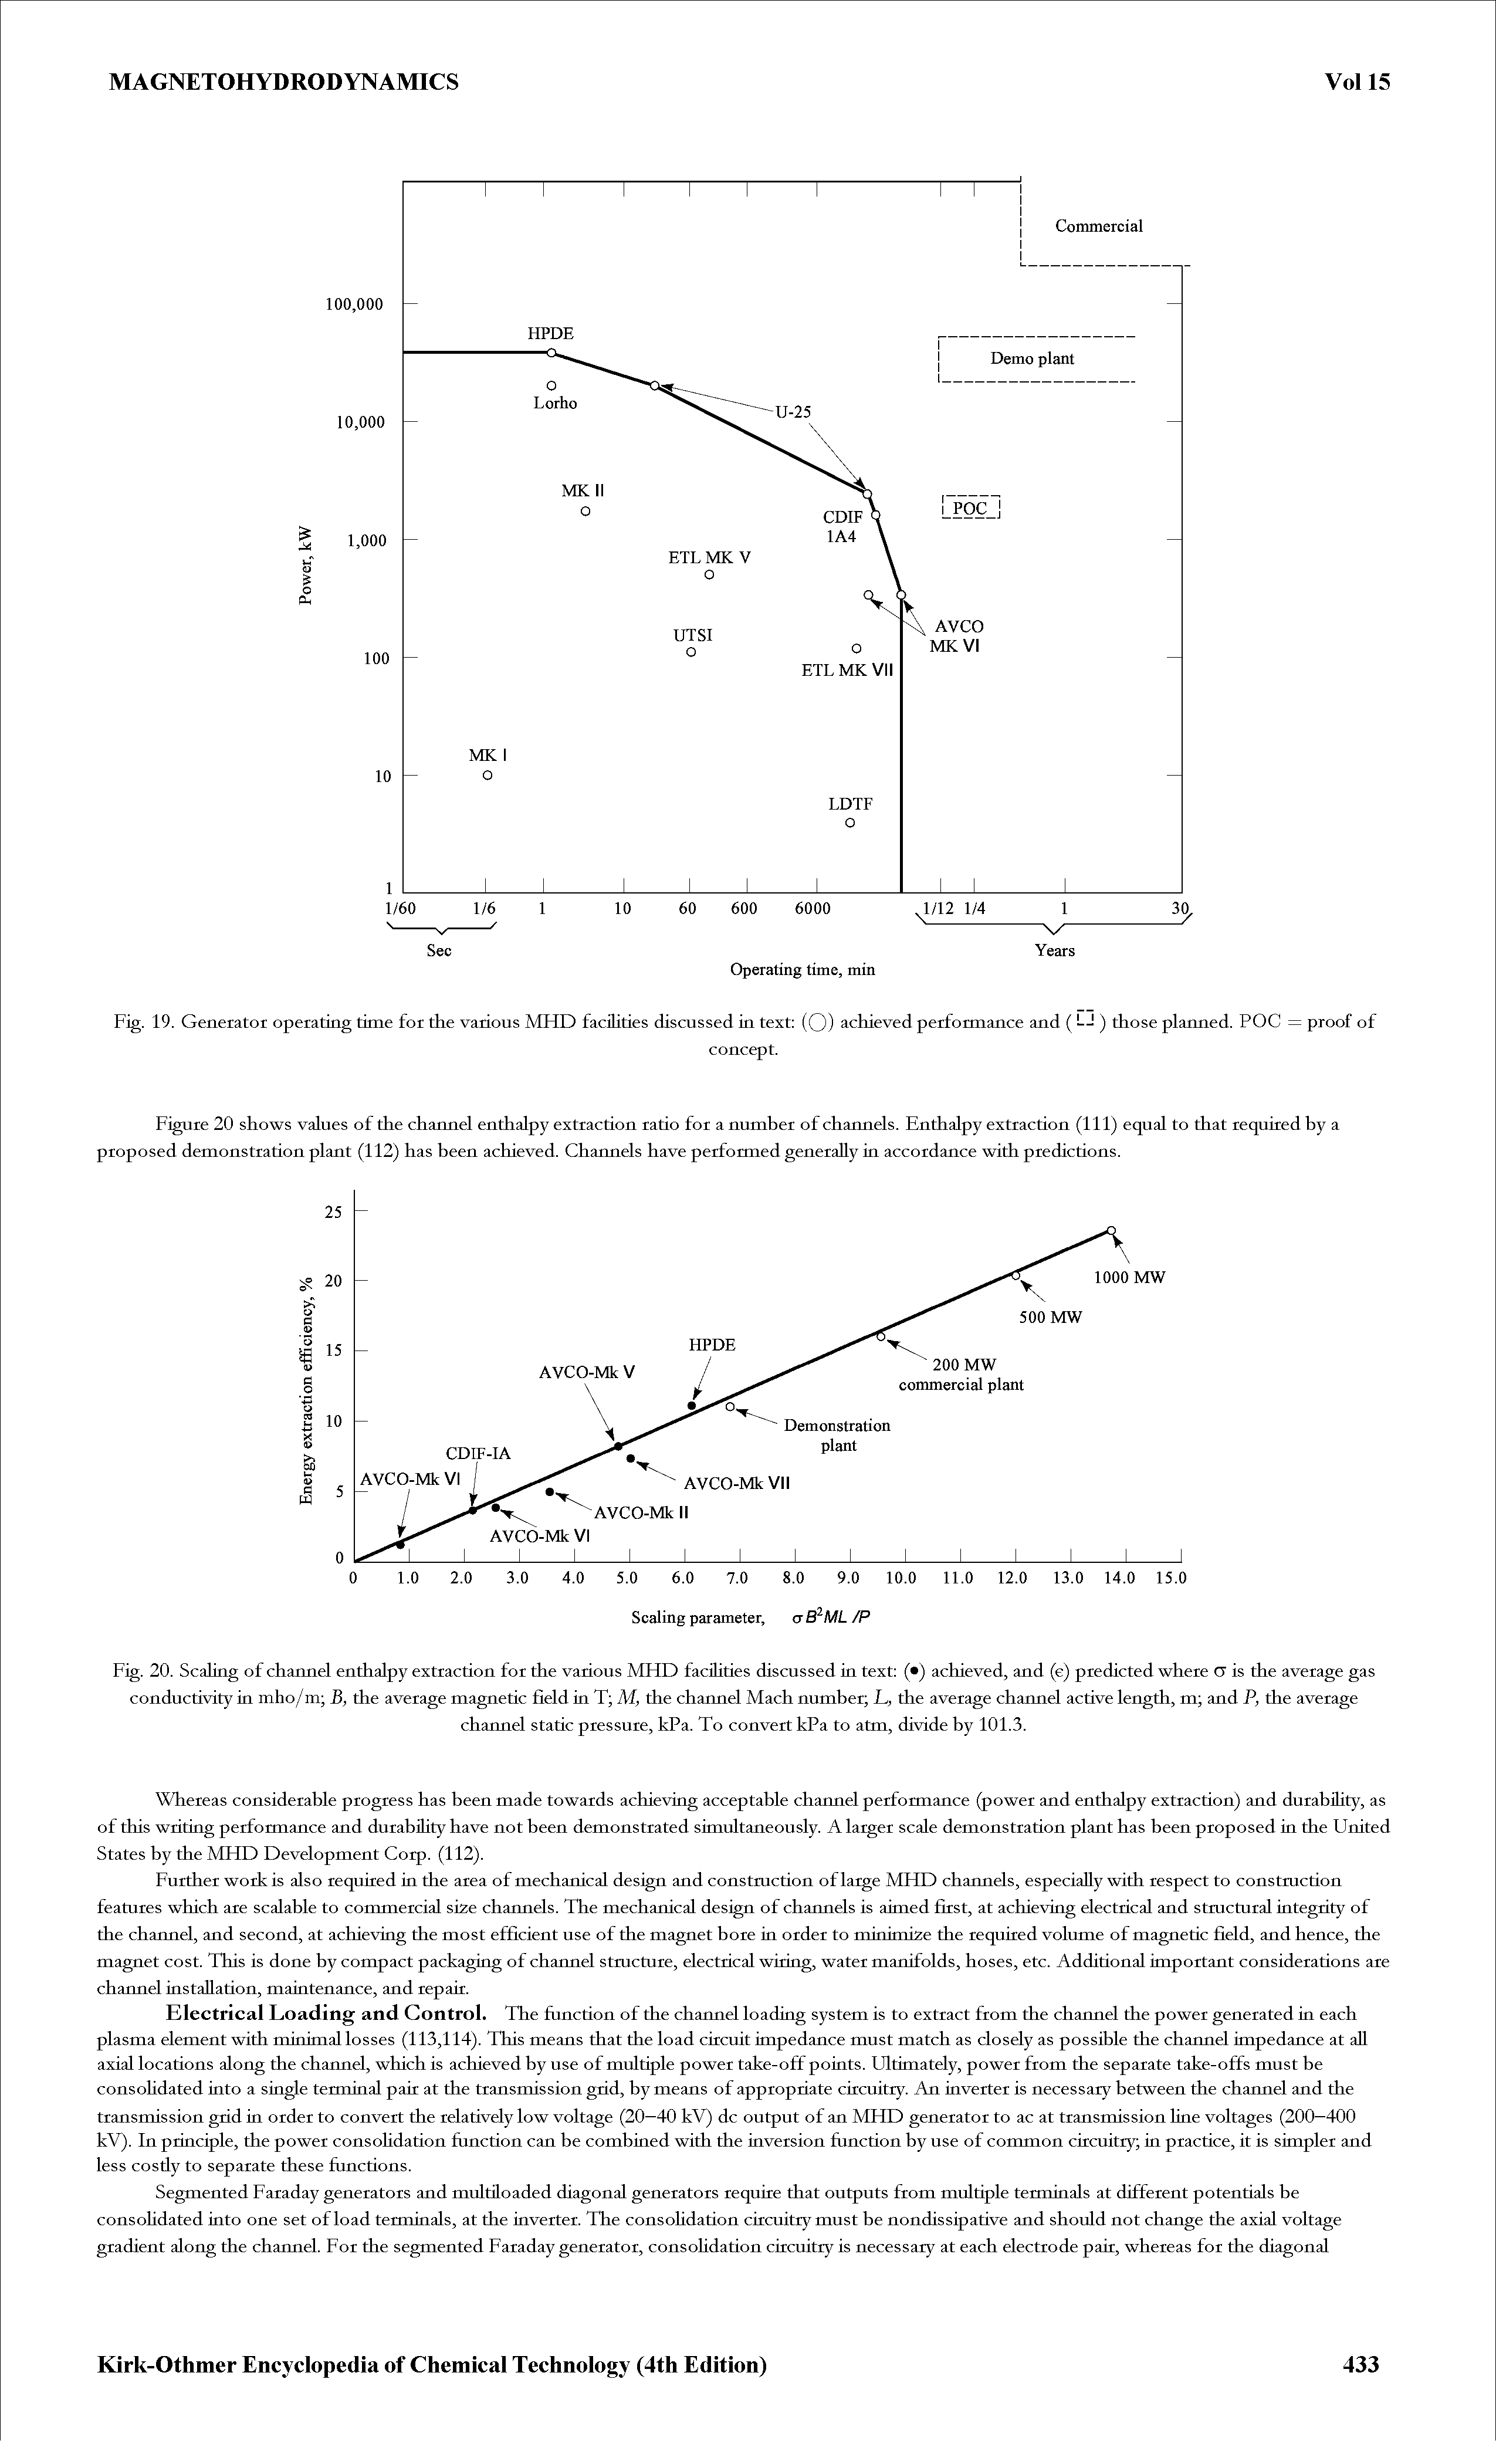 Fig. 20. Scaling of channel enthalpy extraction for the various MHD faciUties discussed in text ( ) achieved, and (e) predicted where O is the average gas conductivity in mho/m B, the average magnetic field in T M, the channel Mach number E, the average channel active length, m and P, the average...